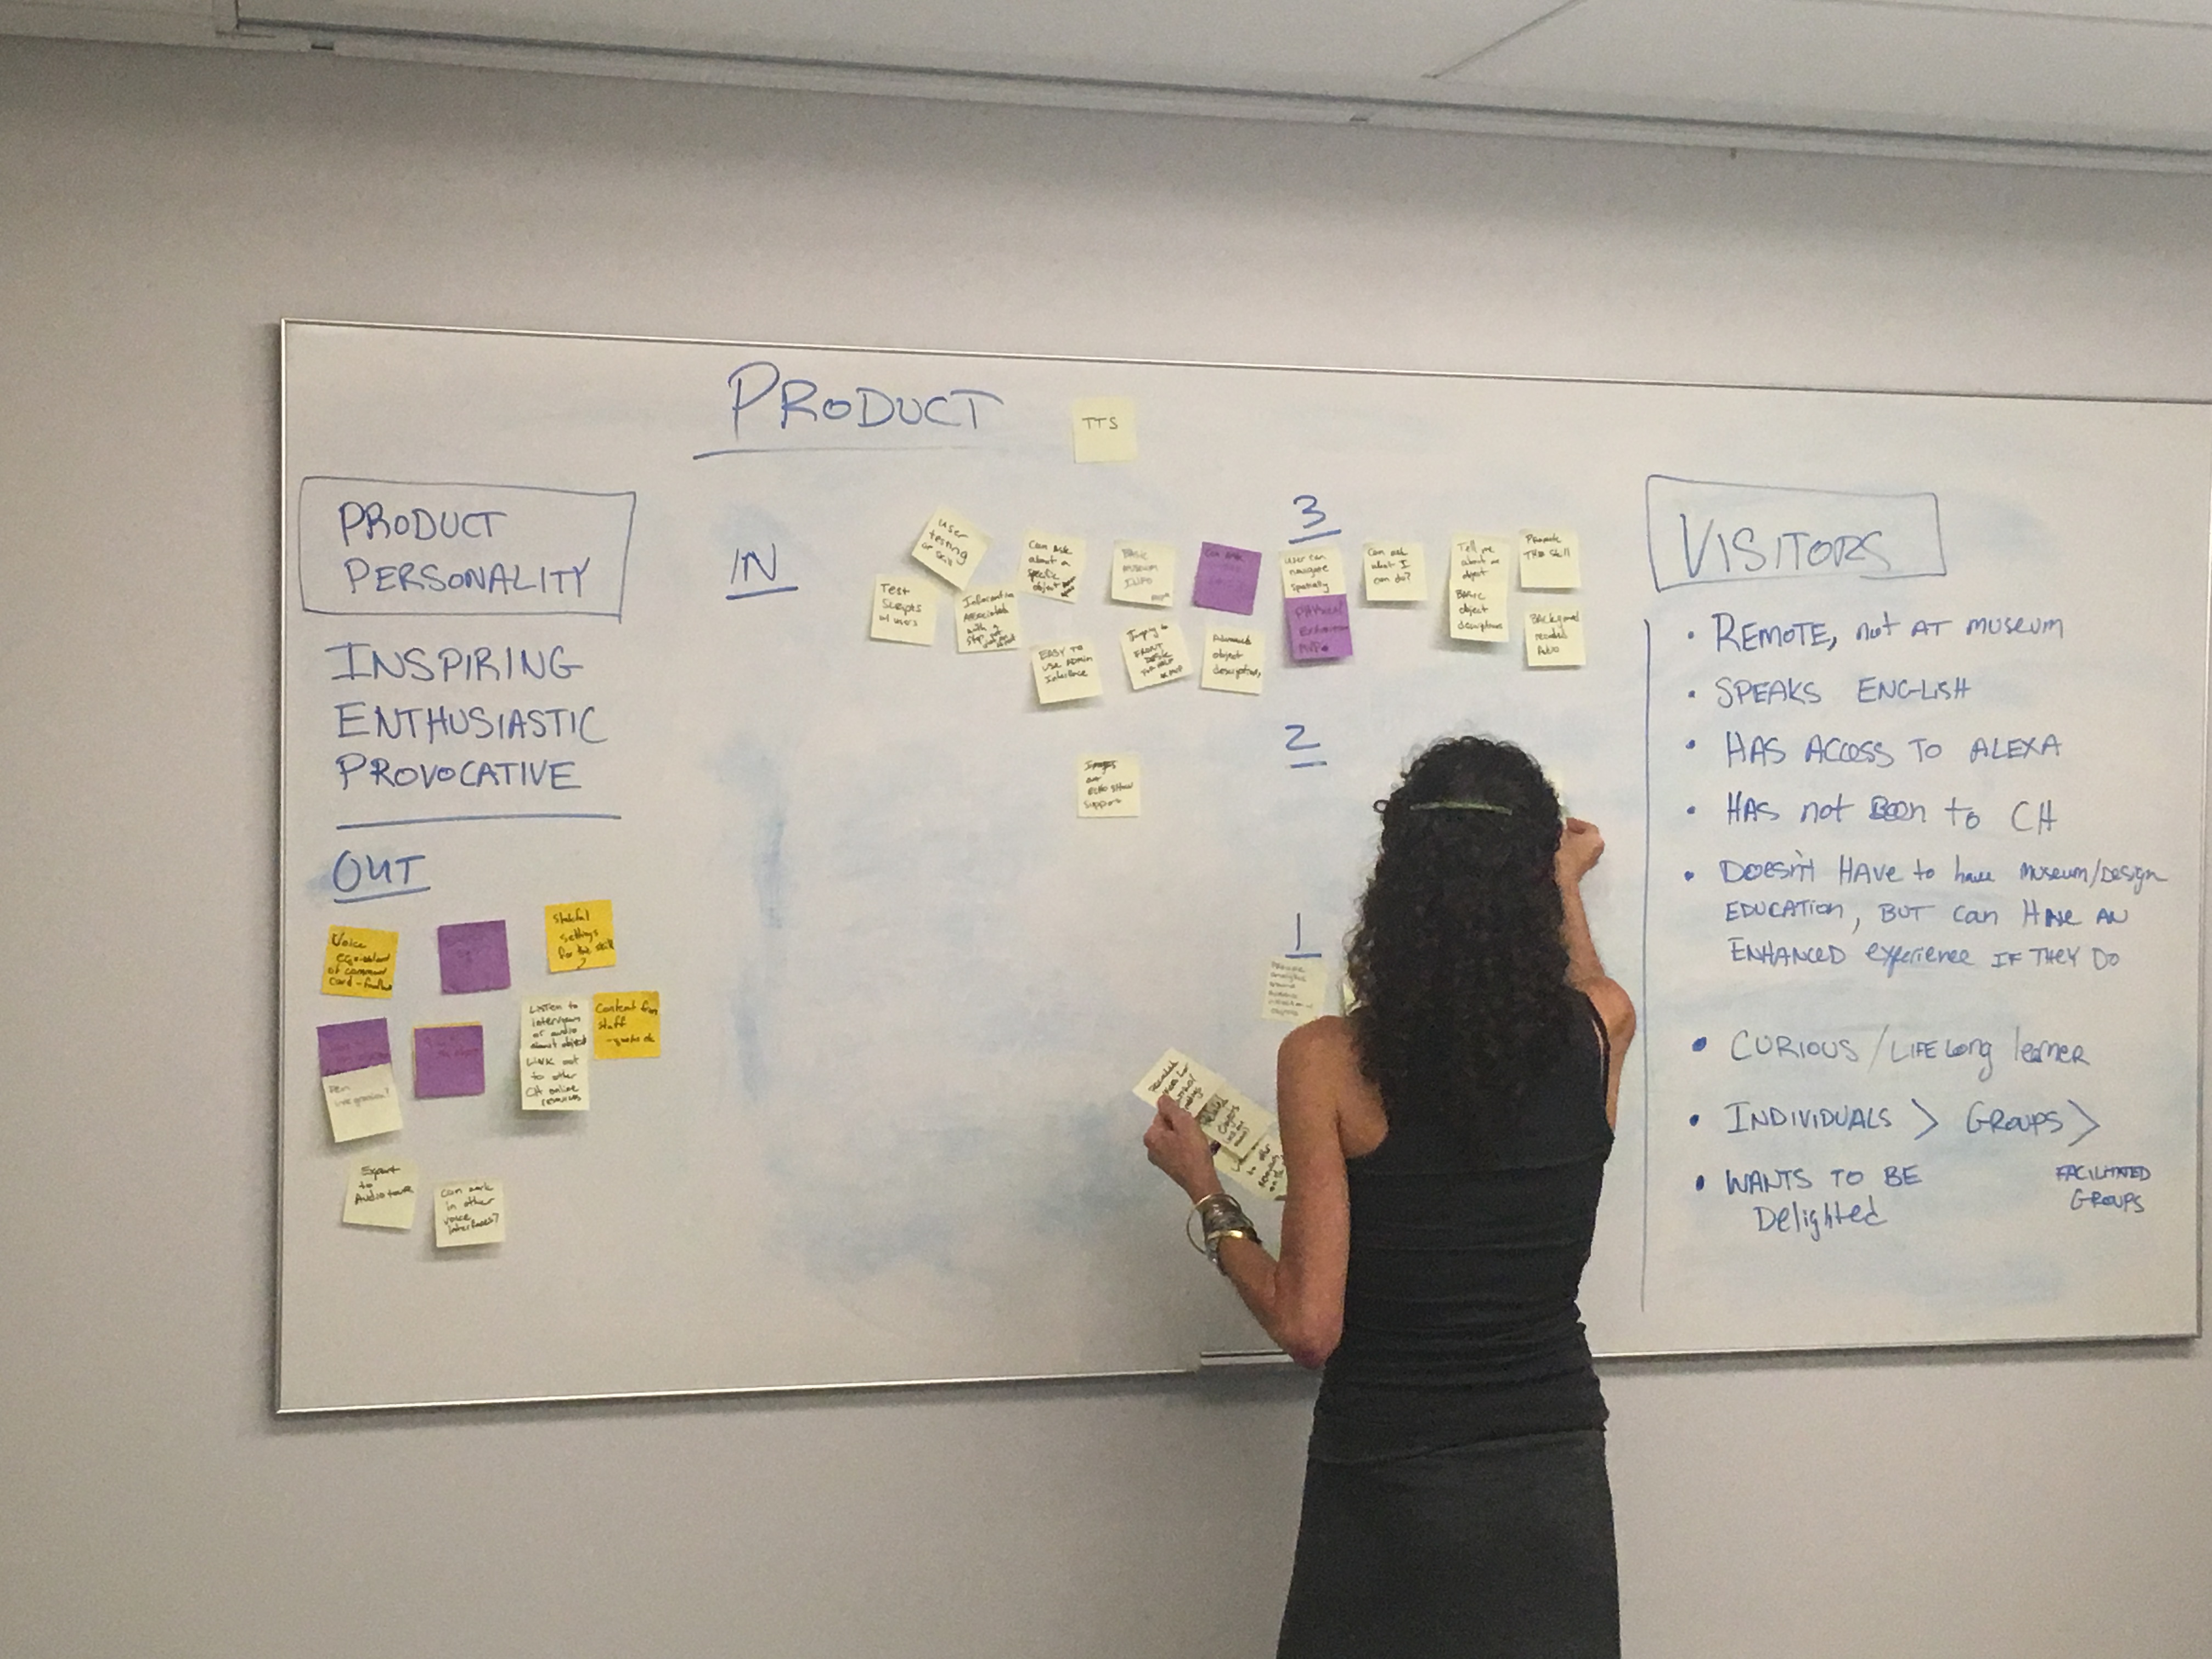 A woman adding post its to a white board with a lot of information on it